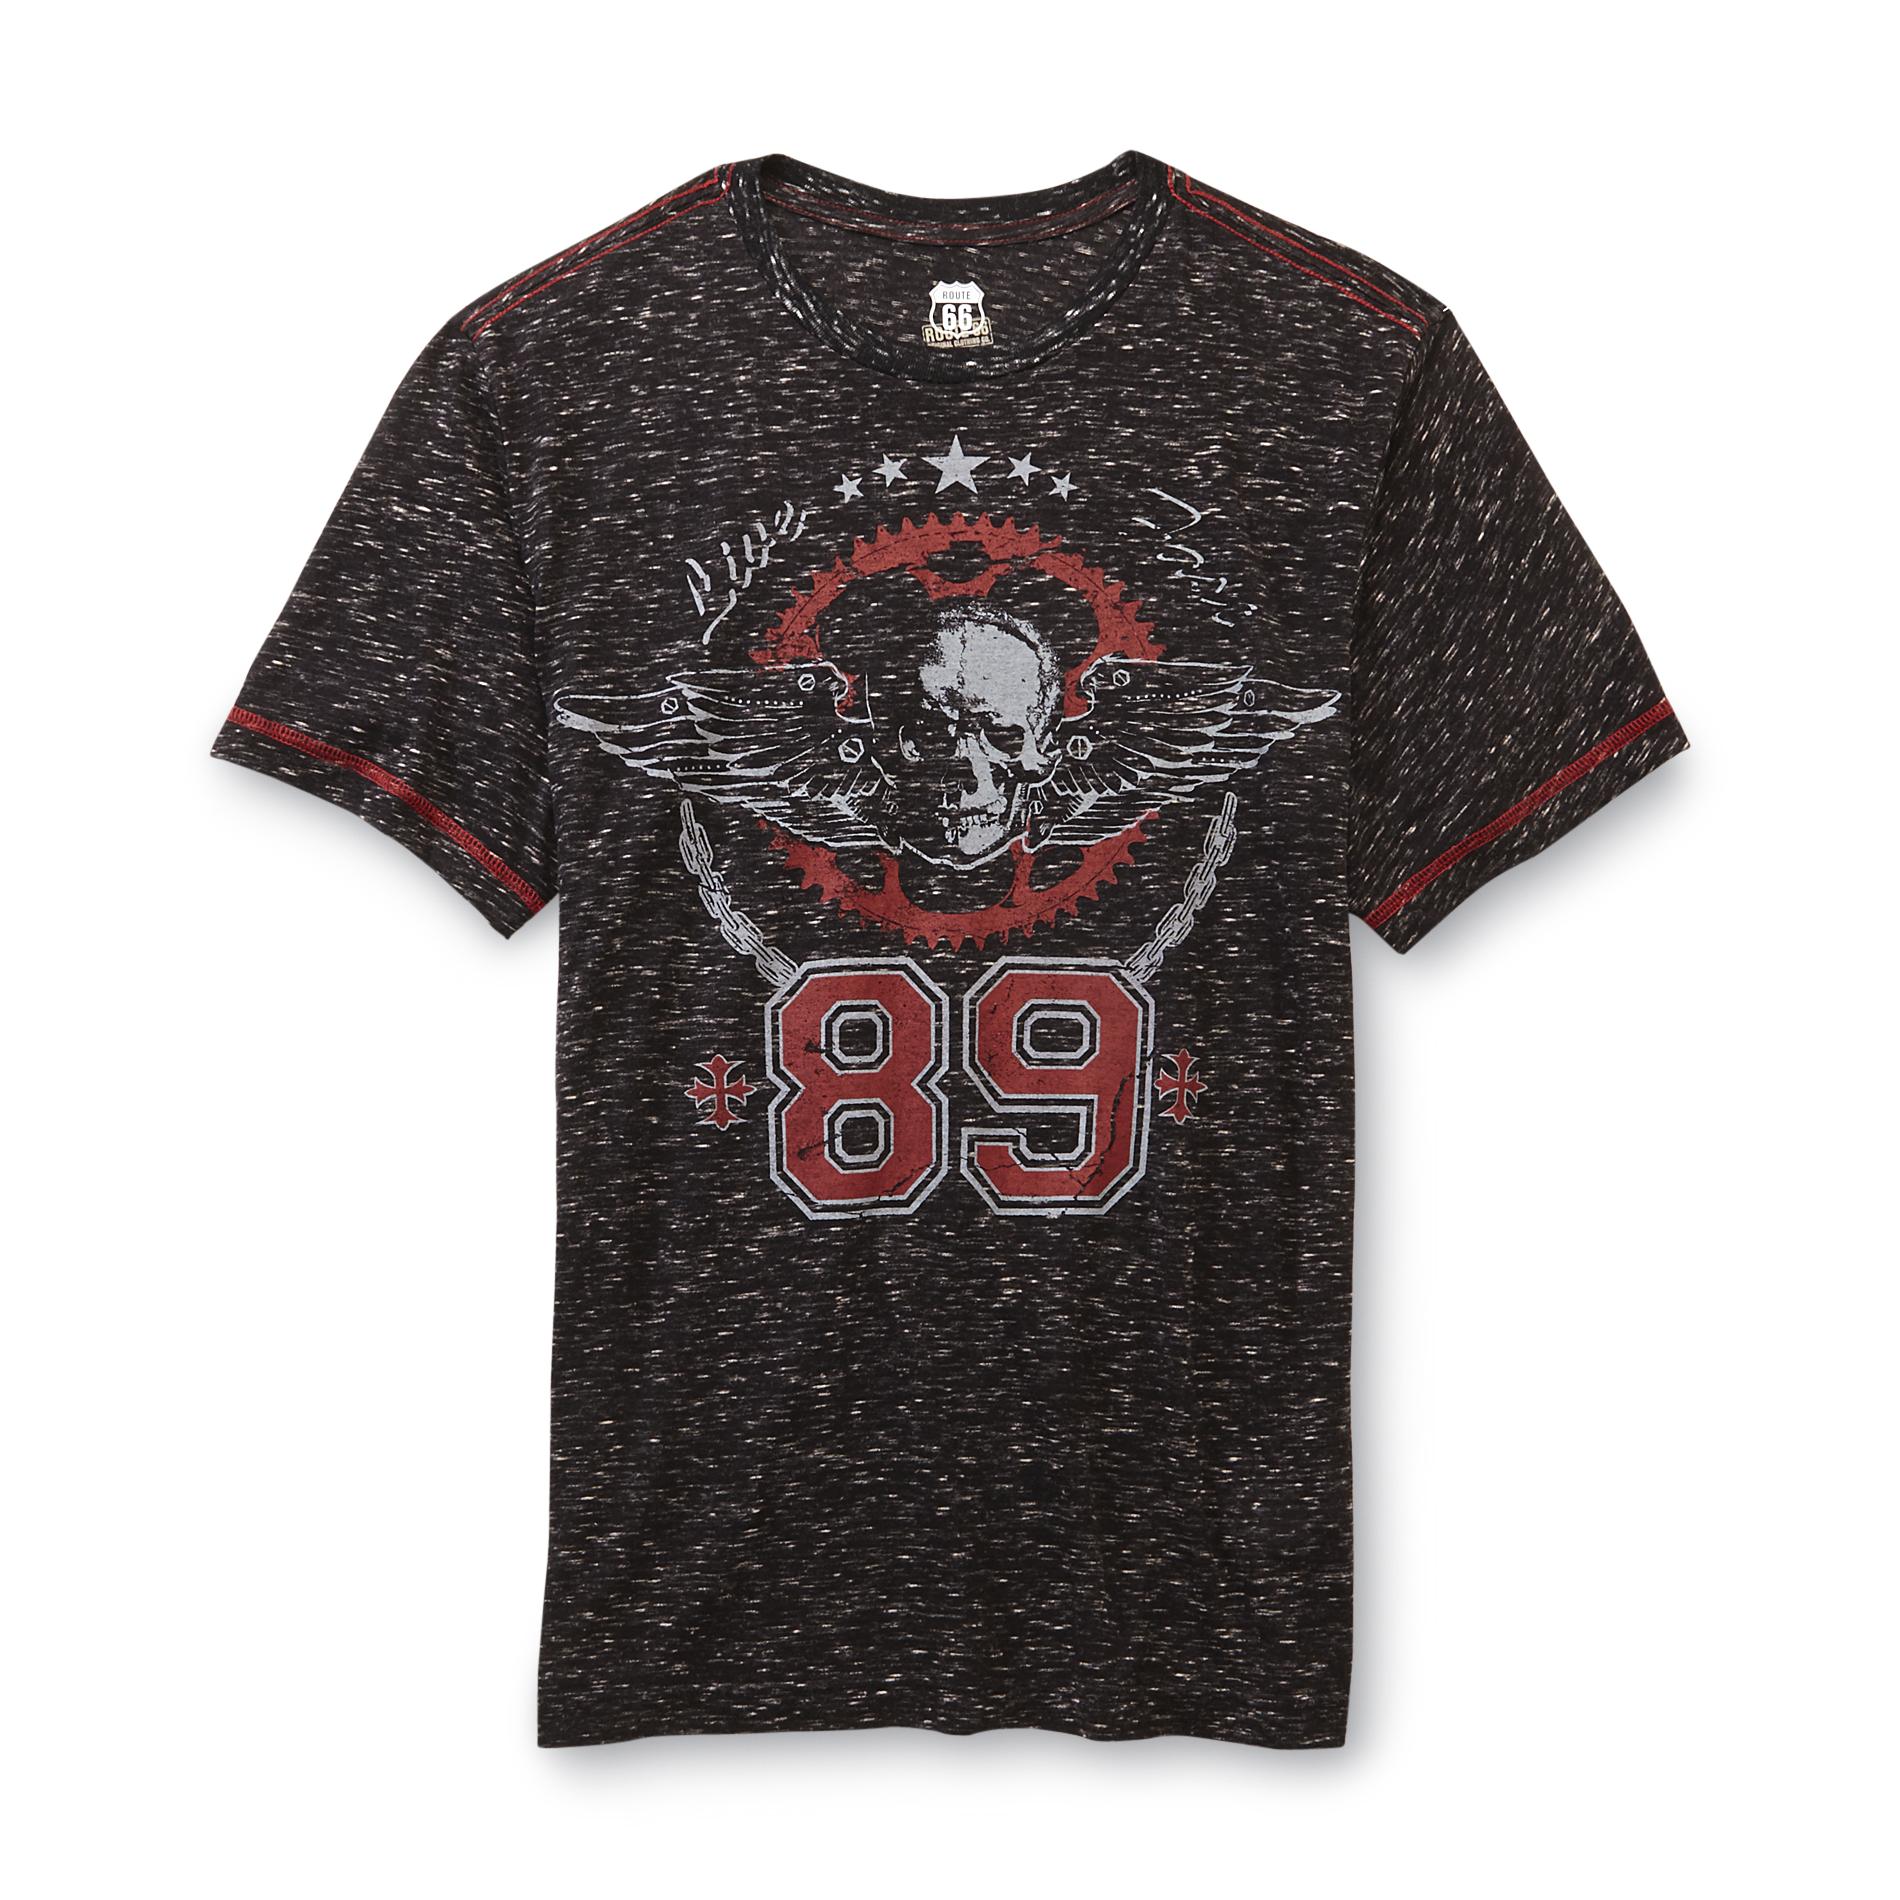 Route 66 Men's Graphic T-Shirt - Winged Skull